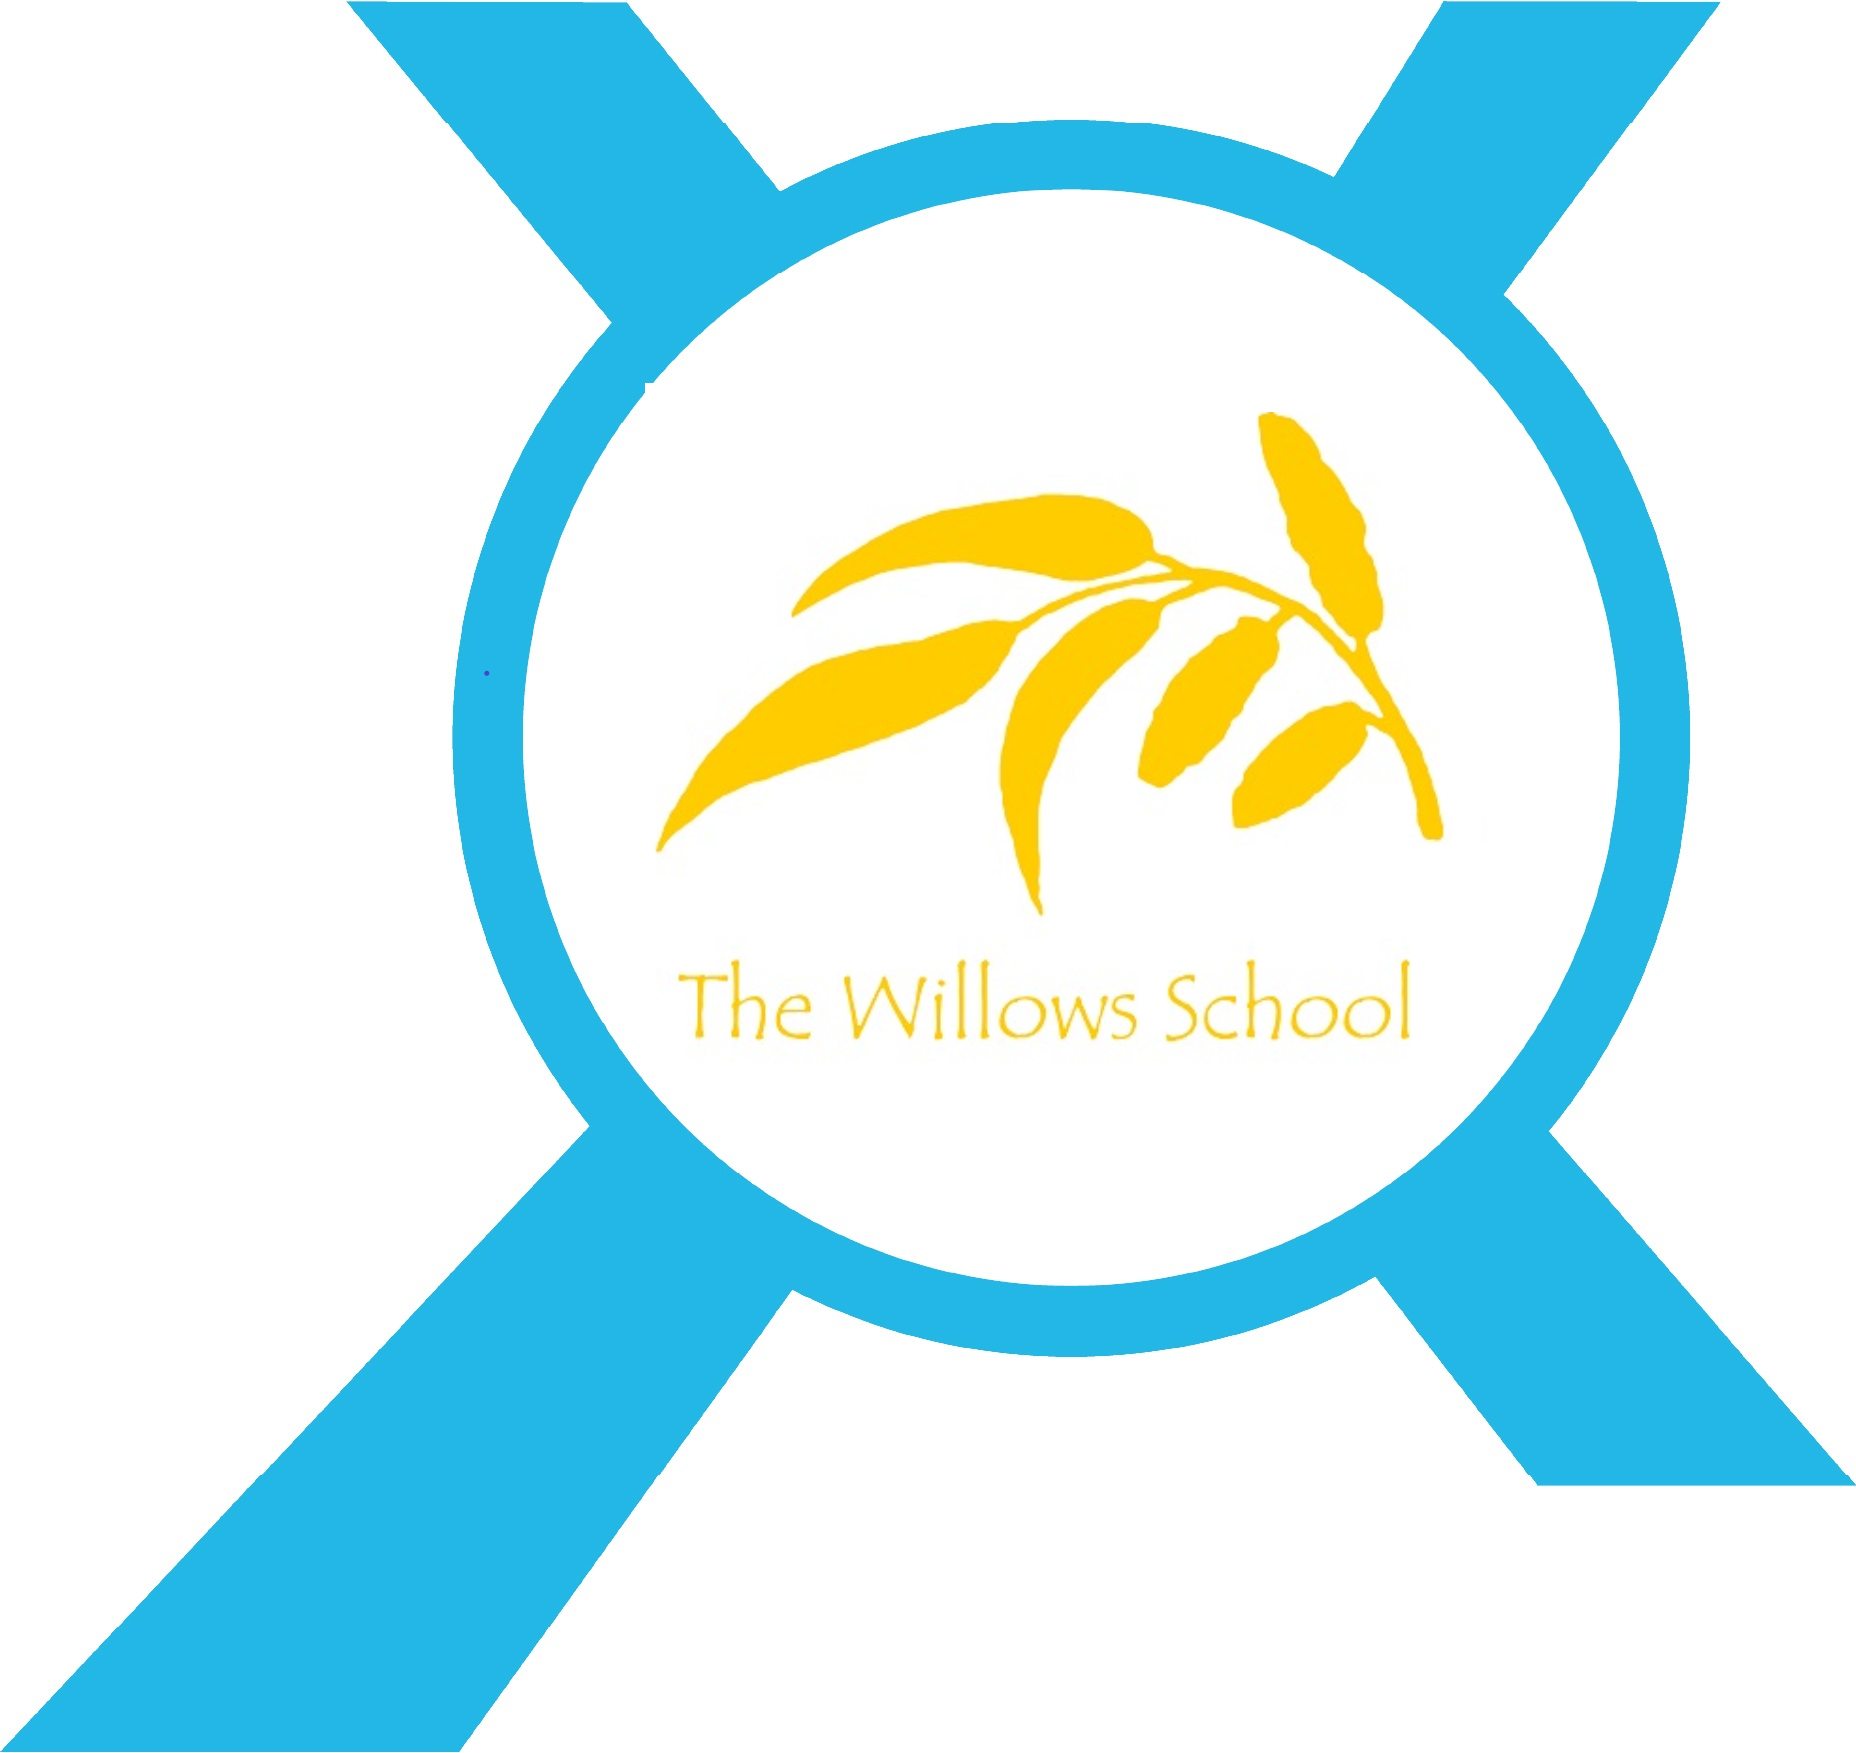 The Willows School